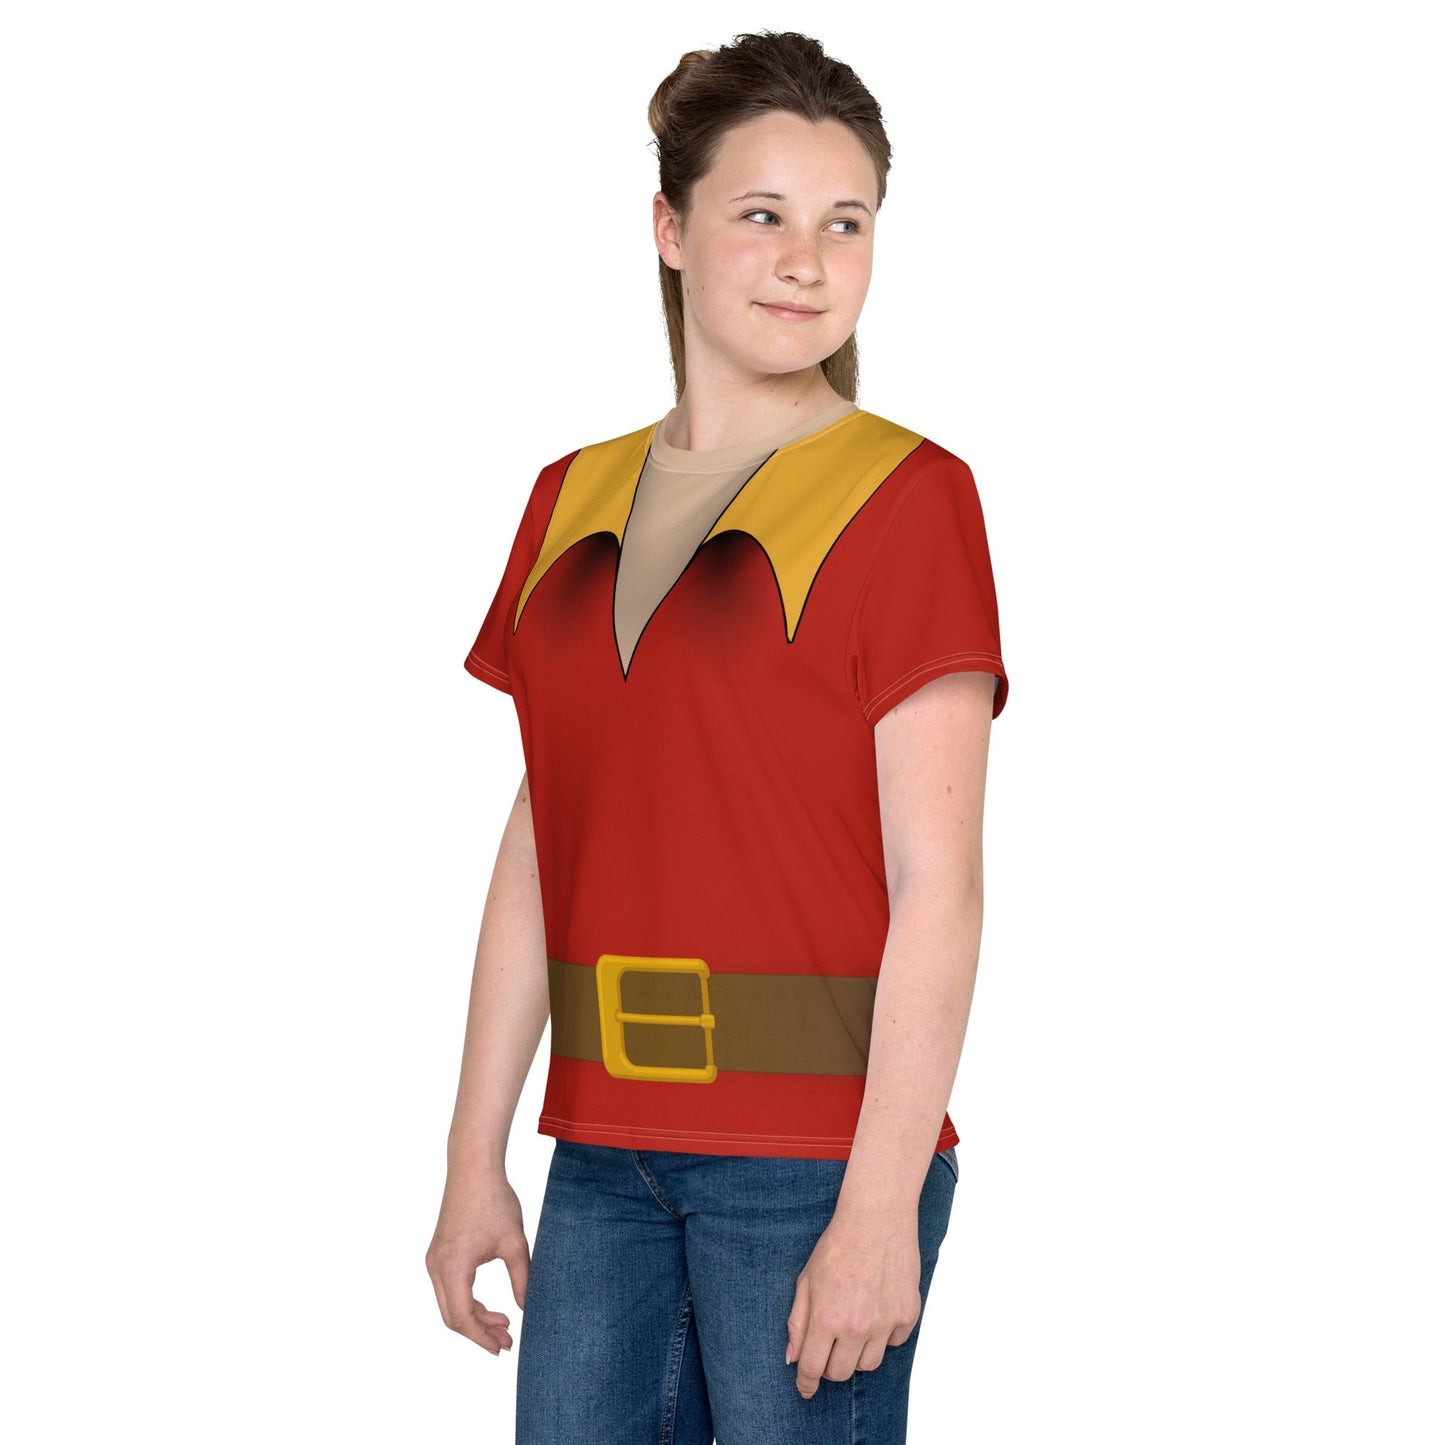 The Gaston Youth crew neck t-shirt beauty beastcosplayWrong Lever Clothing